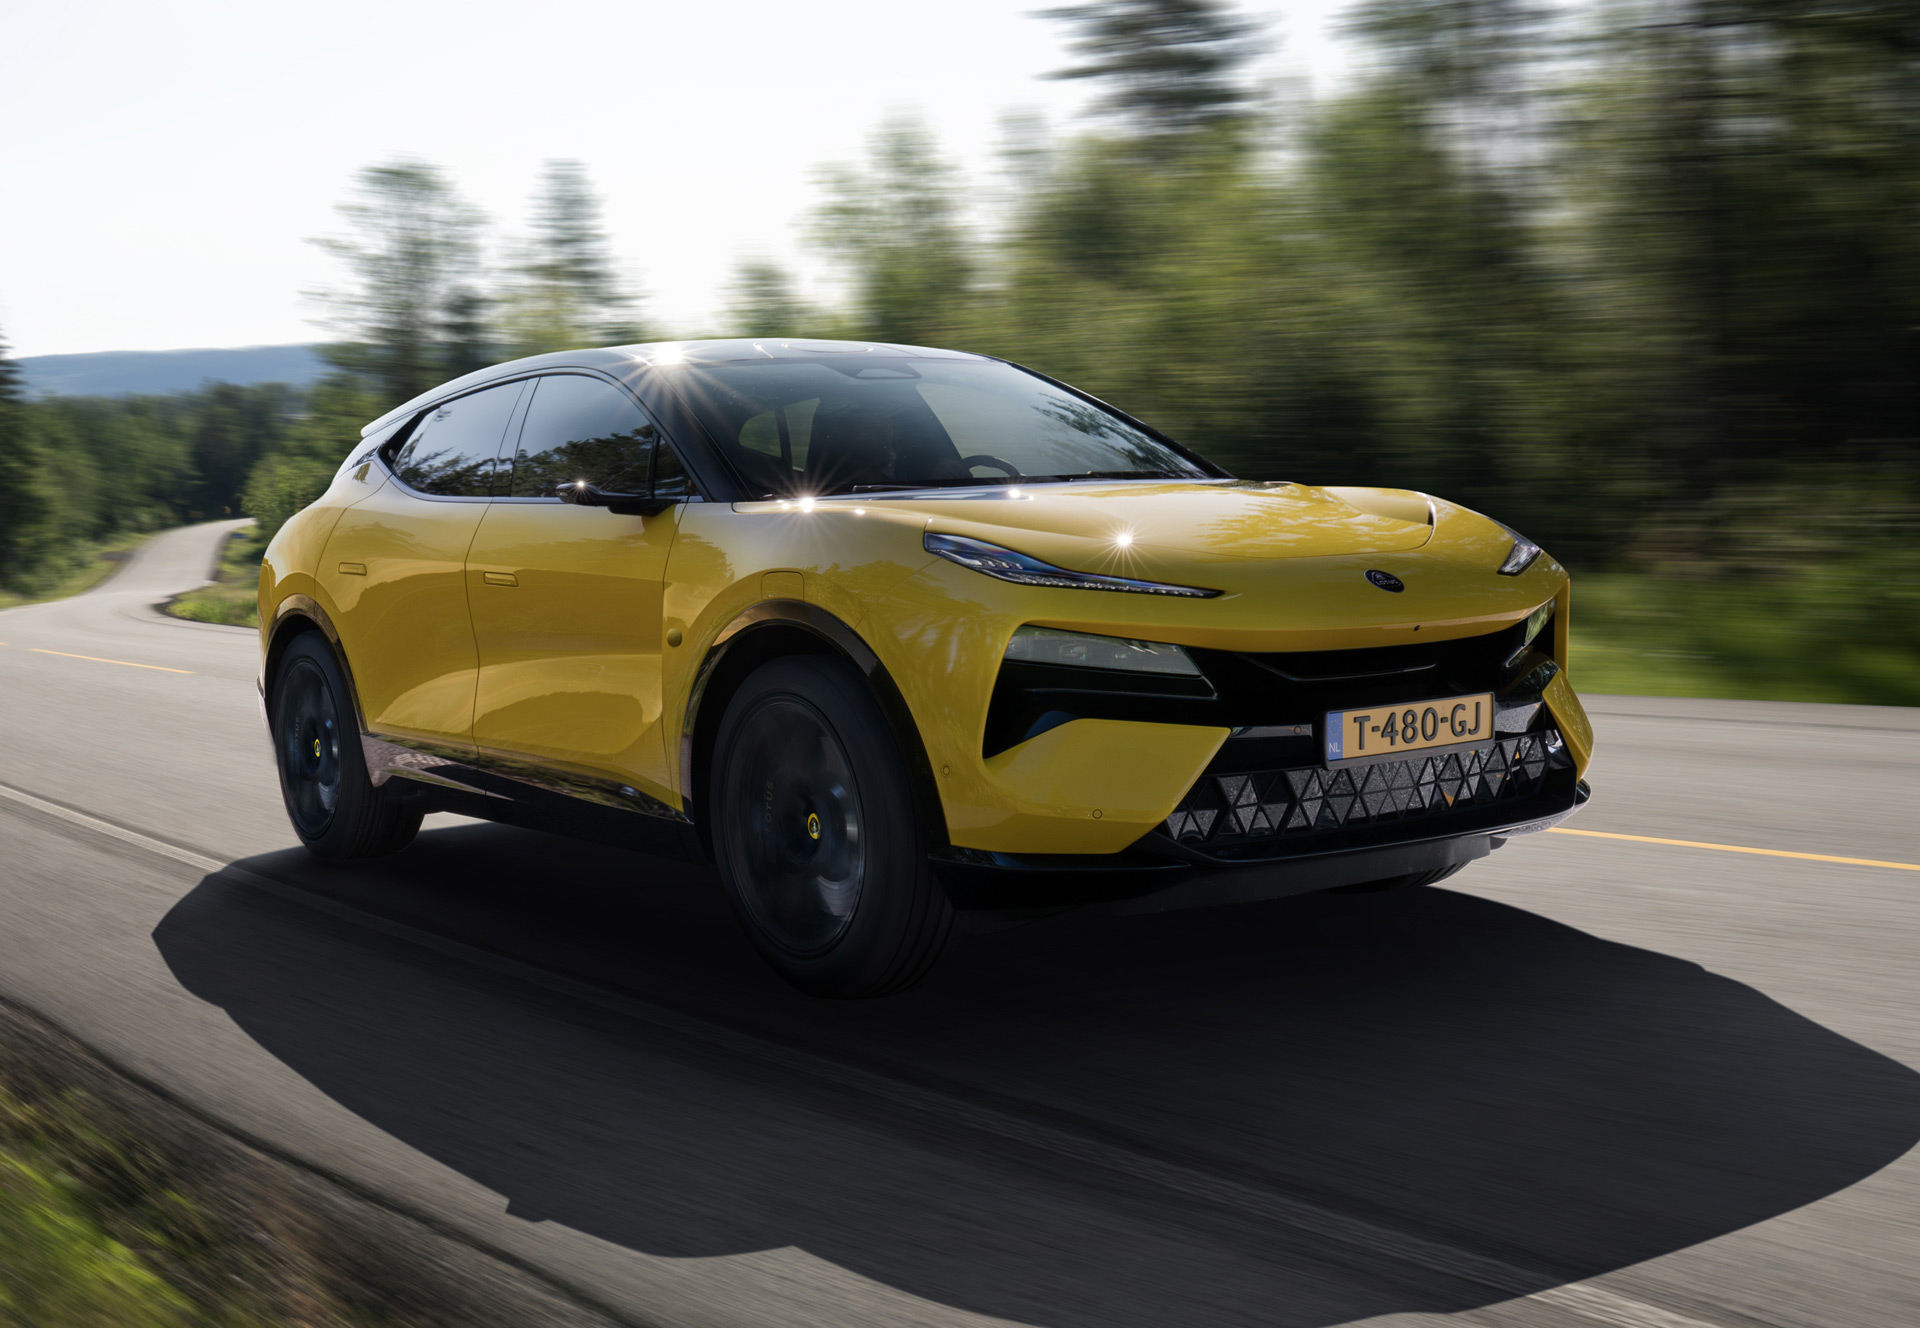 Lotus Eletre reaches US in late '24 with $107,000 base price